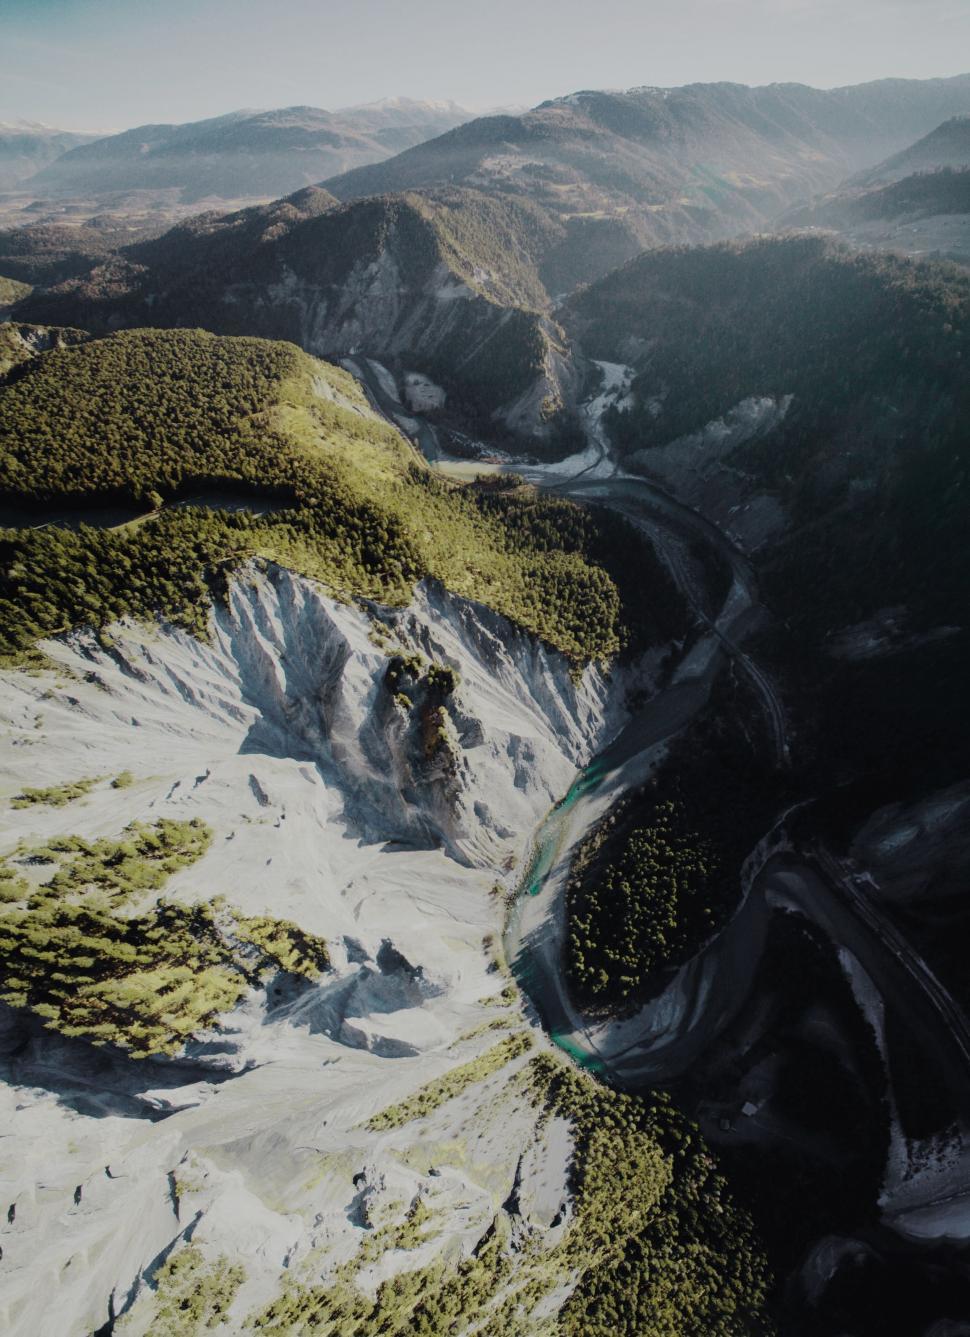 Free Image of Aerial View of Snow Covered Mountain Range 